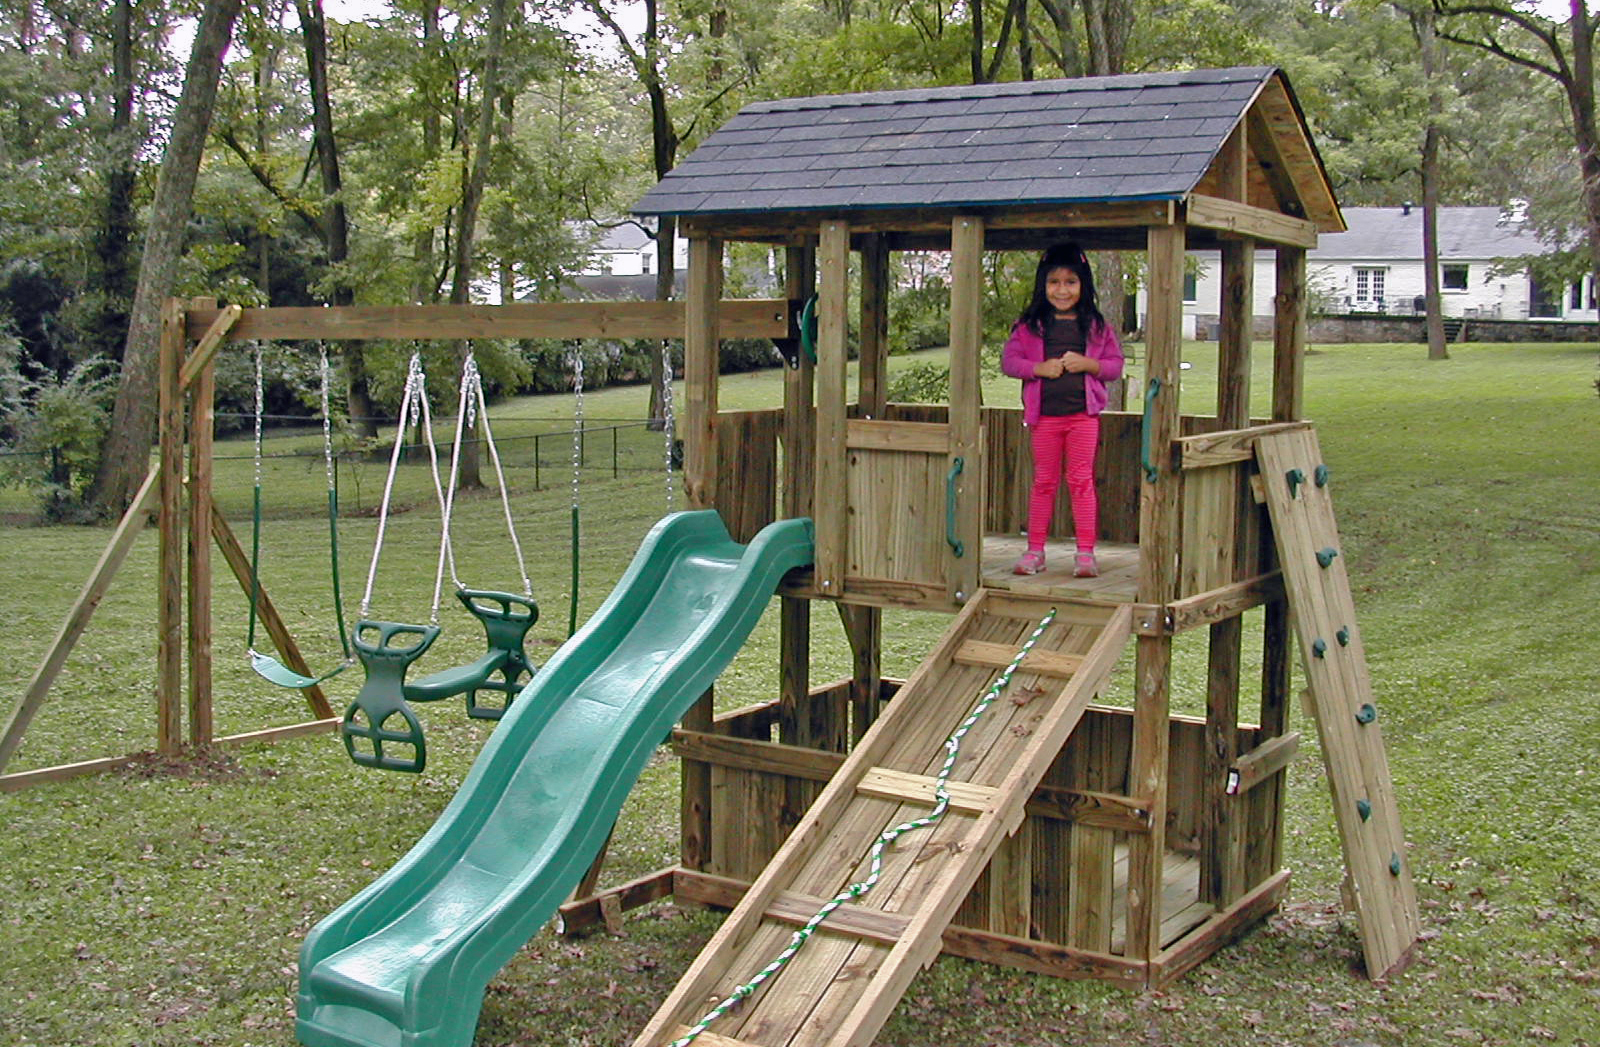 4x6 model as shown $2125.00 including Wooden Ramp with Rope, Green Rock Climbing Wall, Glider Horse, and Shingled Roof